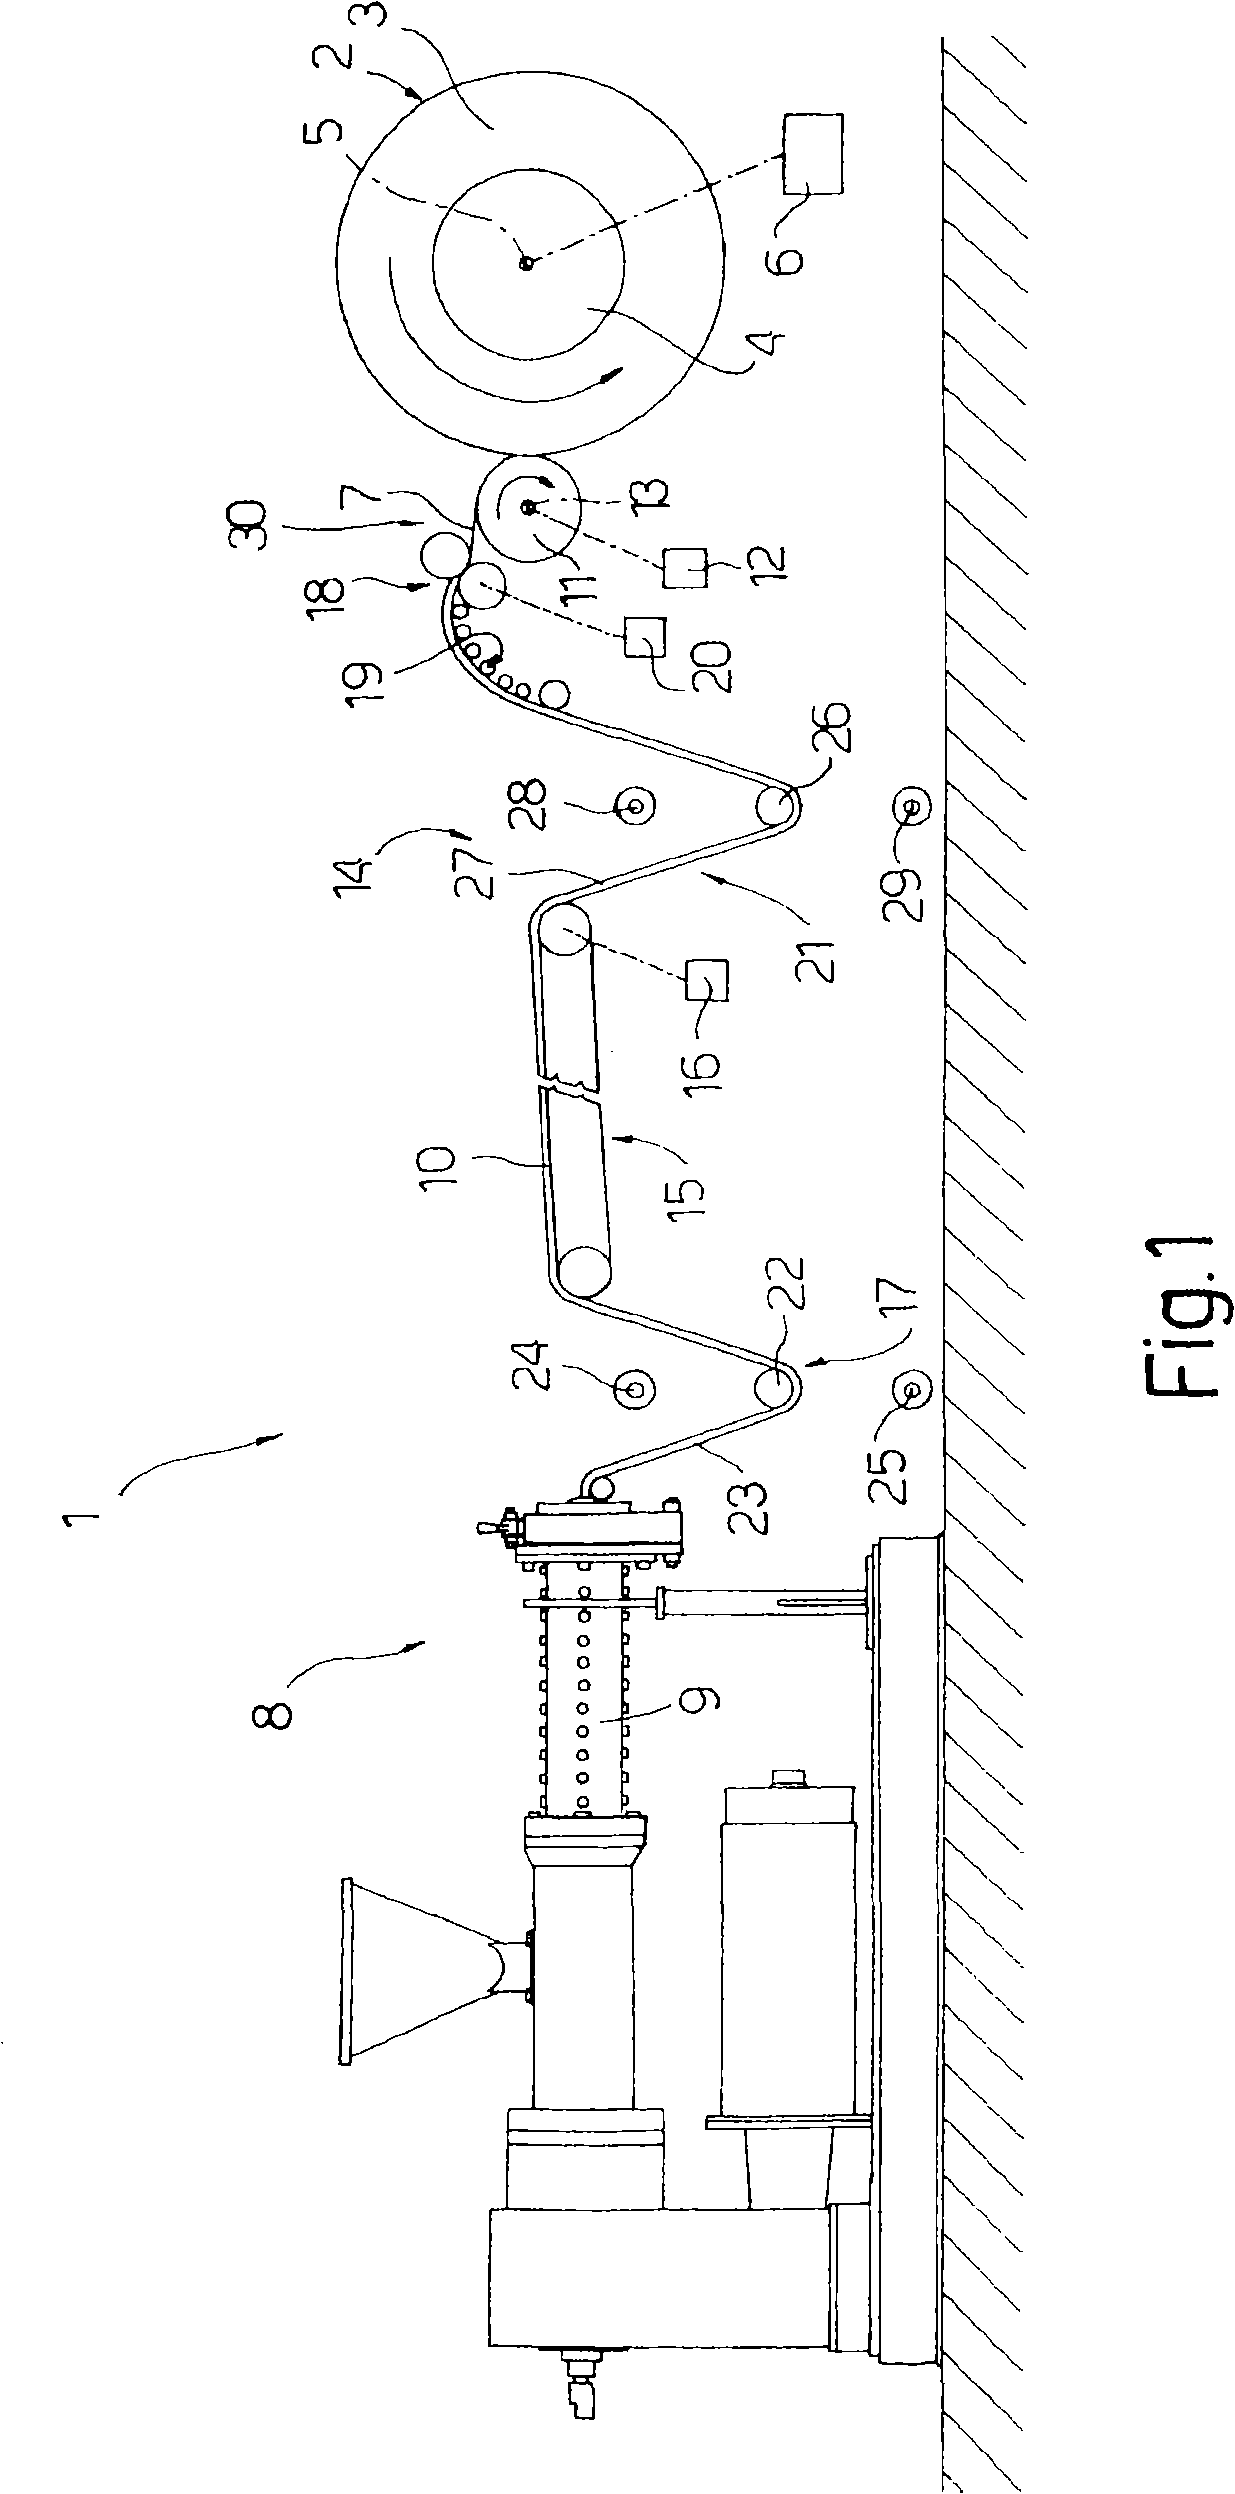 Method and machine for rubberizing an annular surface of a body